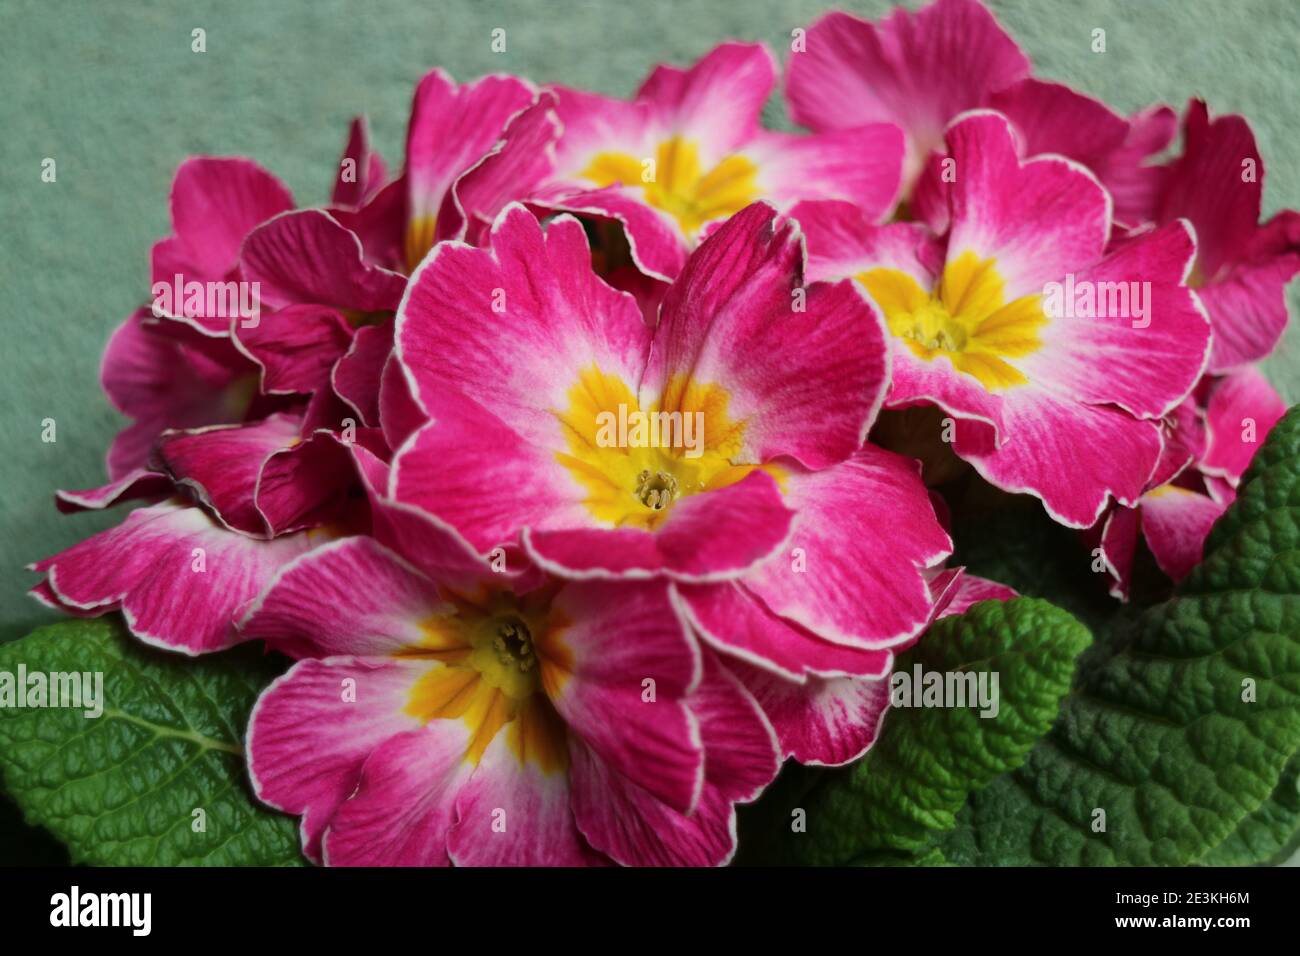 Pink Primula with yellow stamens and green leaves, pink primula macro, Beauty in nature, floral photo, macro photography, stock image Stock Photo